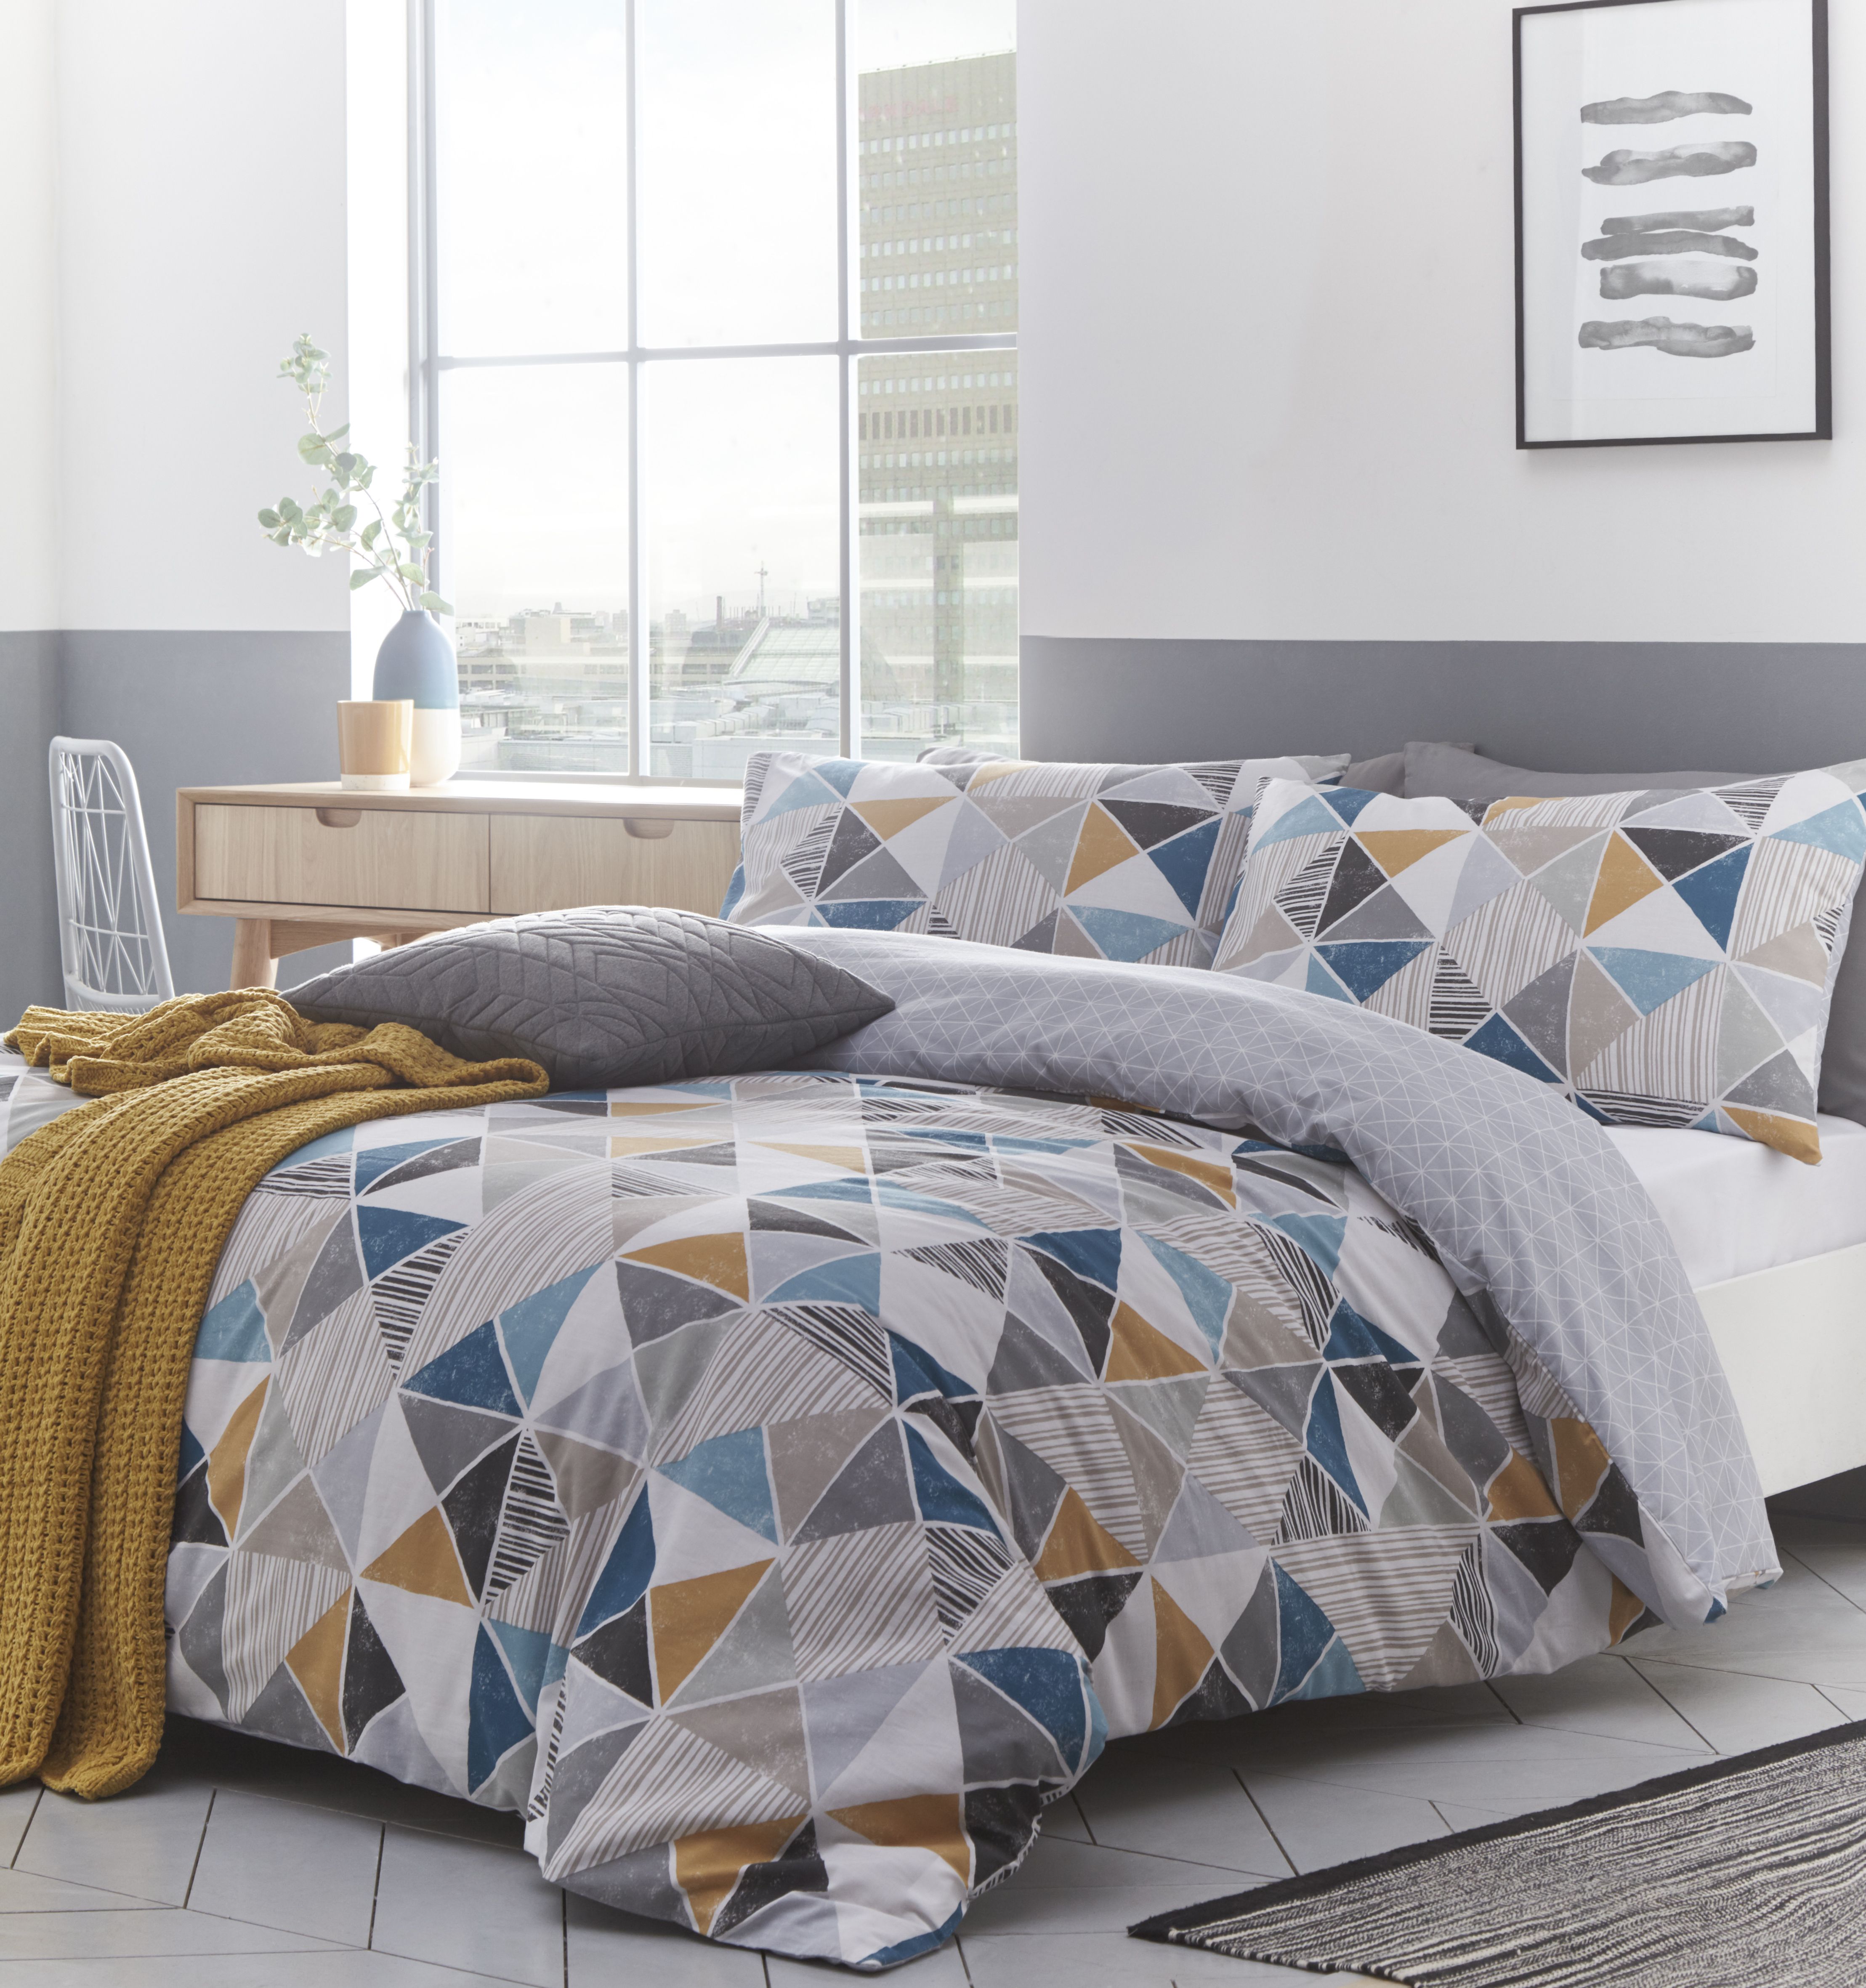 The striking geometric design of the Harlequin duvet cover and pillow case set creates a tapestry of shapes that perfectly fit together with squares, triangles and diamonds jumping out in different colours and designs. The main colour scheme of this gorgeous duvet features white, grey and beige with shocks of orange and teal making this pattern pop. The reverse features a defused light grey design to draw attention to the audacious front. Made of crisp polycotton making this duvet set soft and hard-wearing. This duvet cover features a secure button closure while the pillowcases have an envelope closure. Machine washable on a 40 degree cycle. Iron cool and tumble dry on a low setting for the best finish.